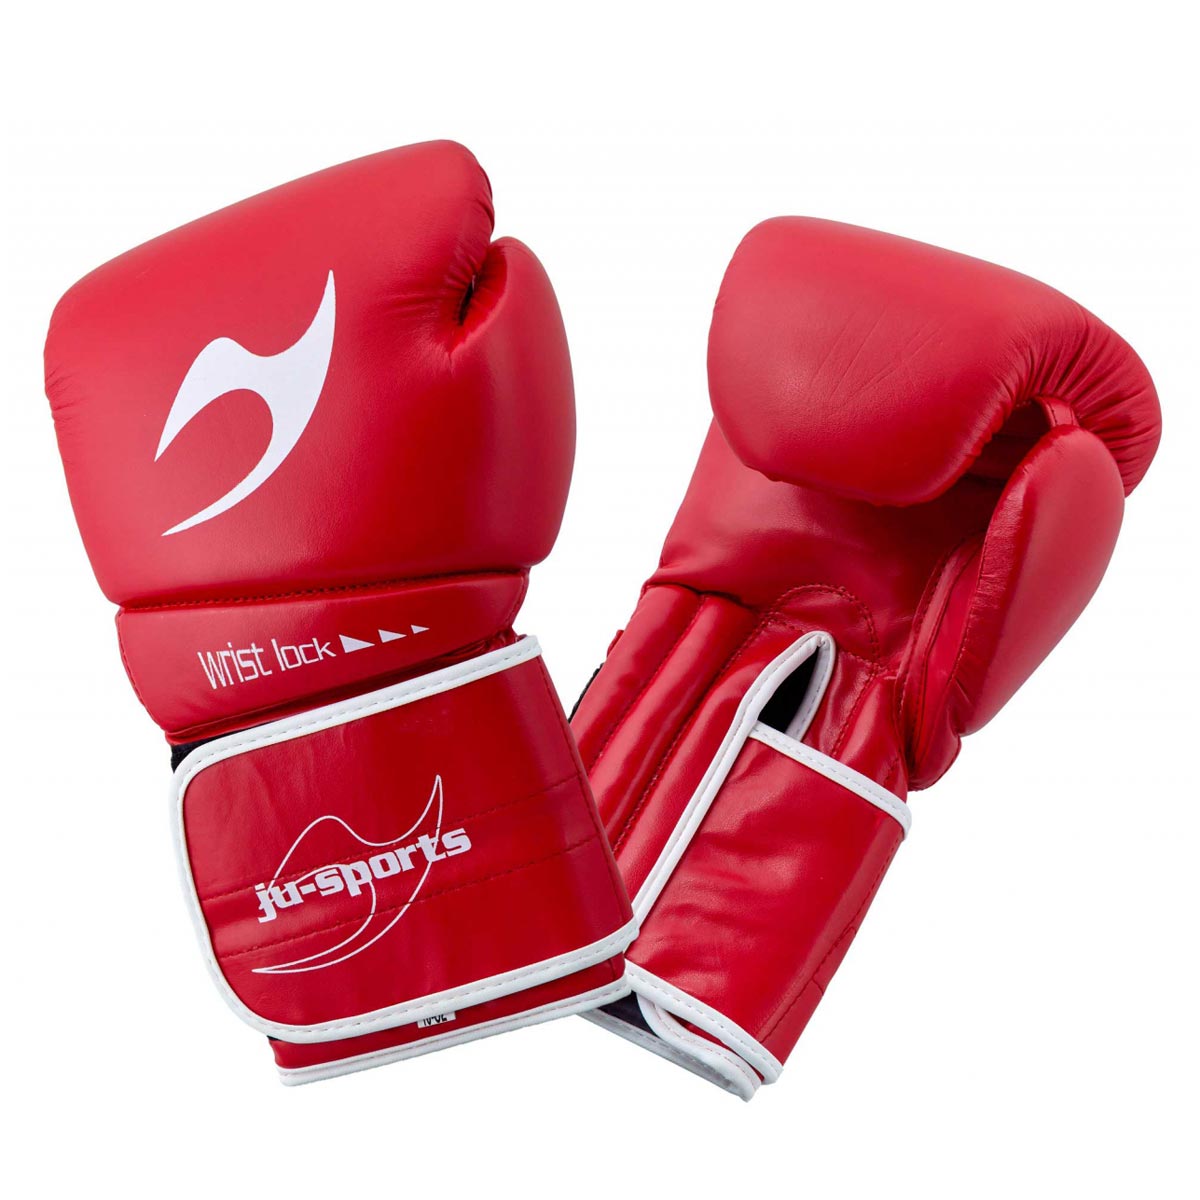 ju- Sports C16 Competitor Pro Gloves Oz 10 Re-AFR_000764_H2 Boxing Leather